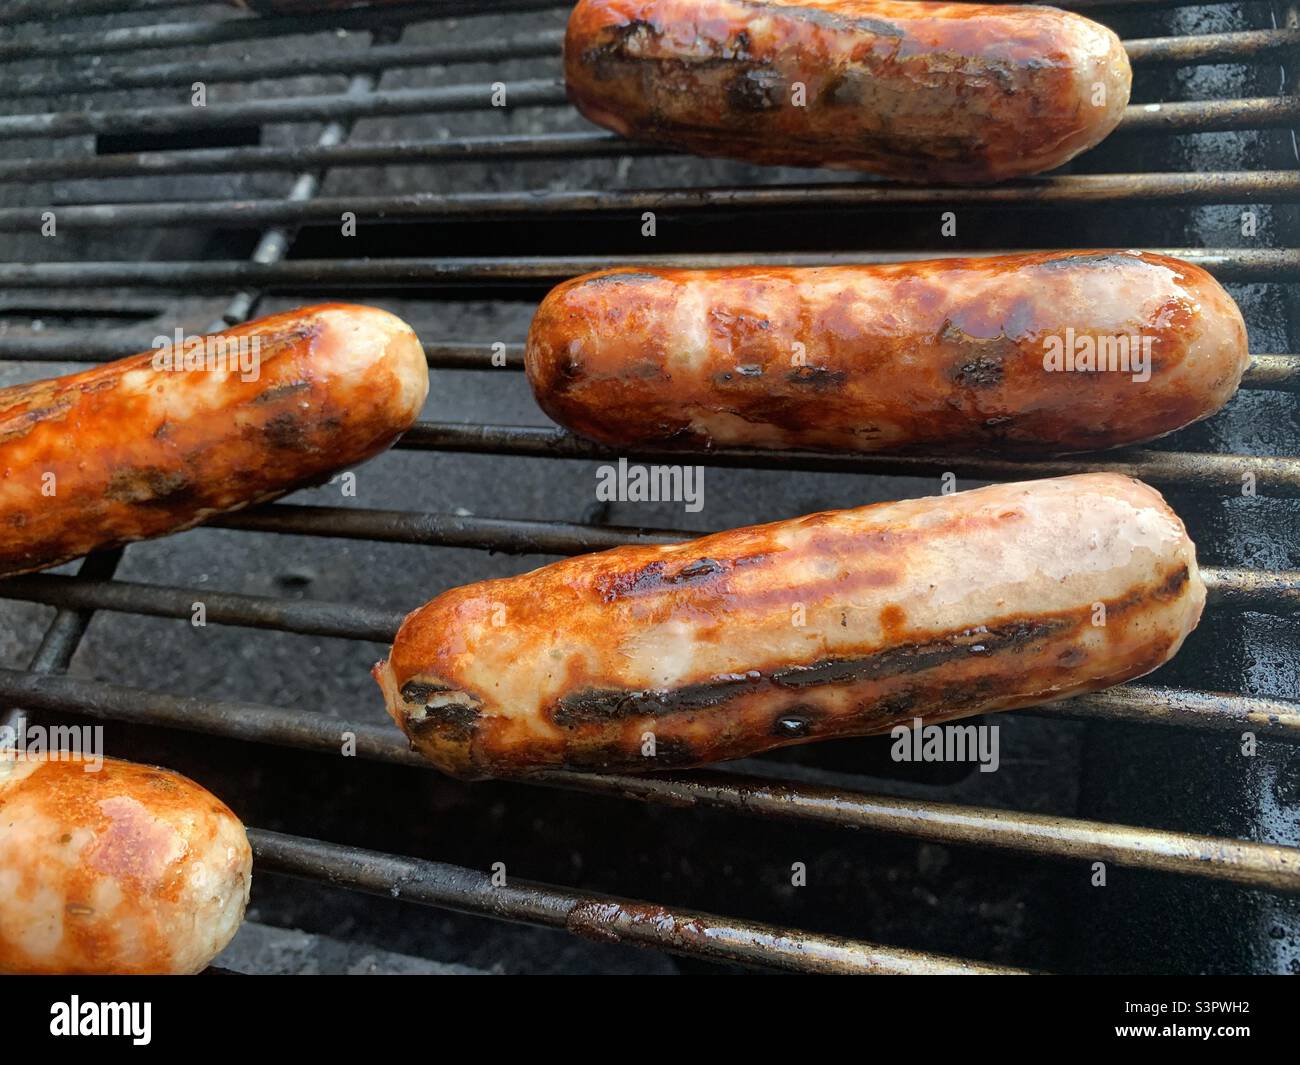 Sausages on a barbecue Stock Photo